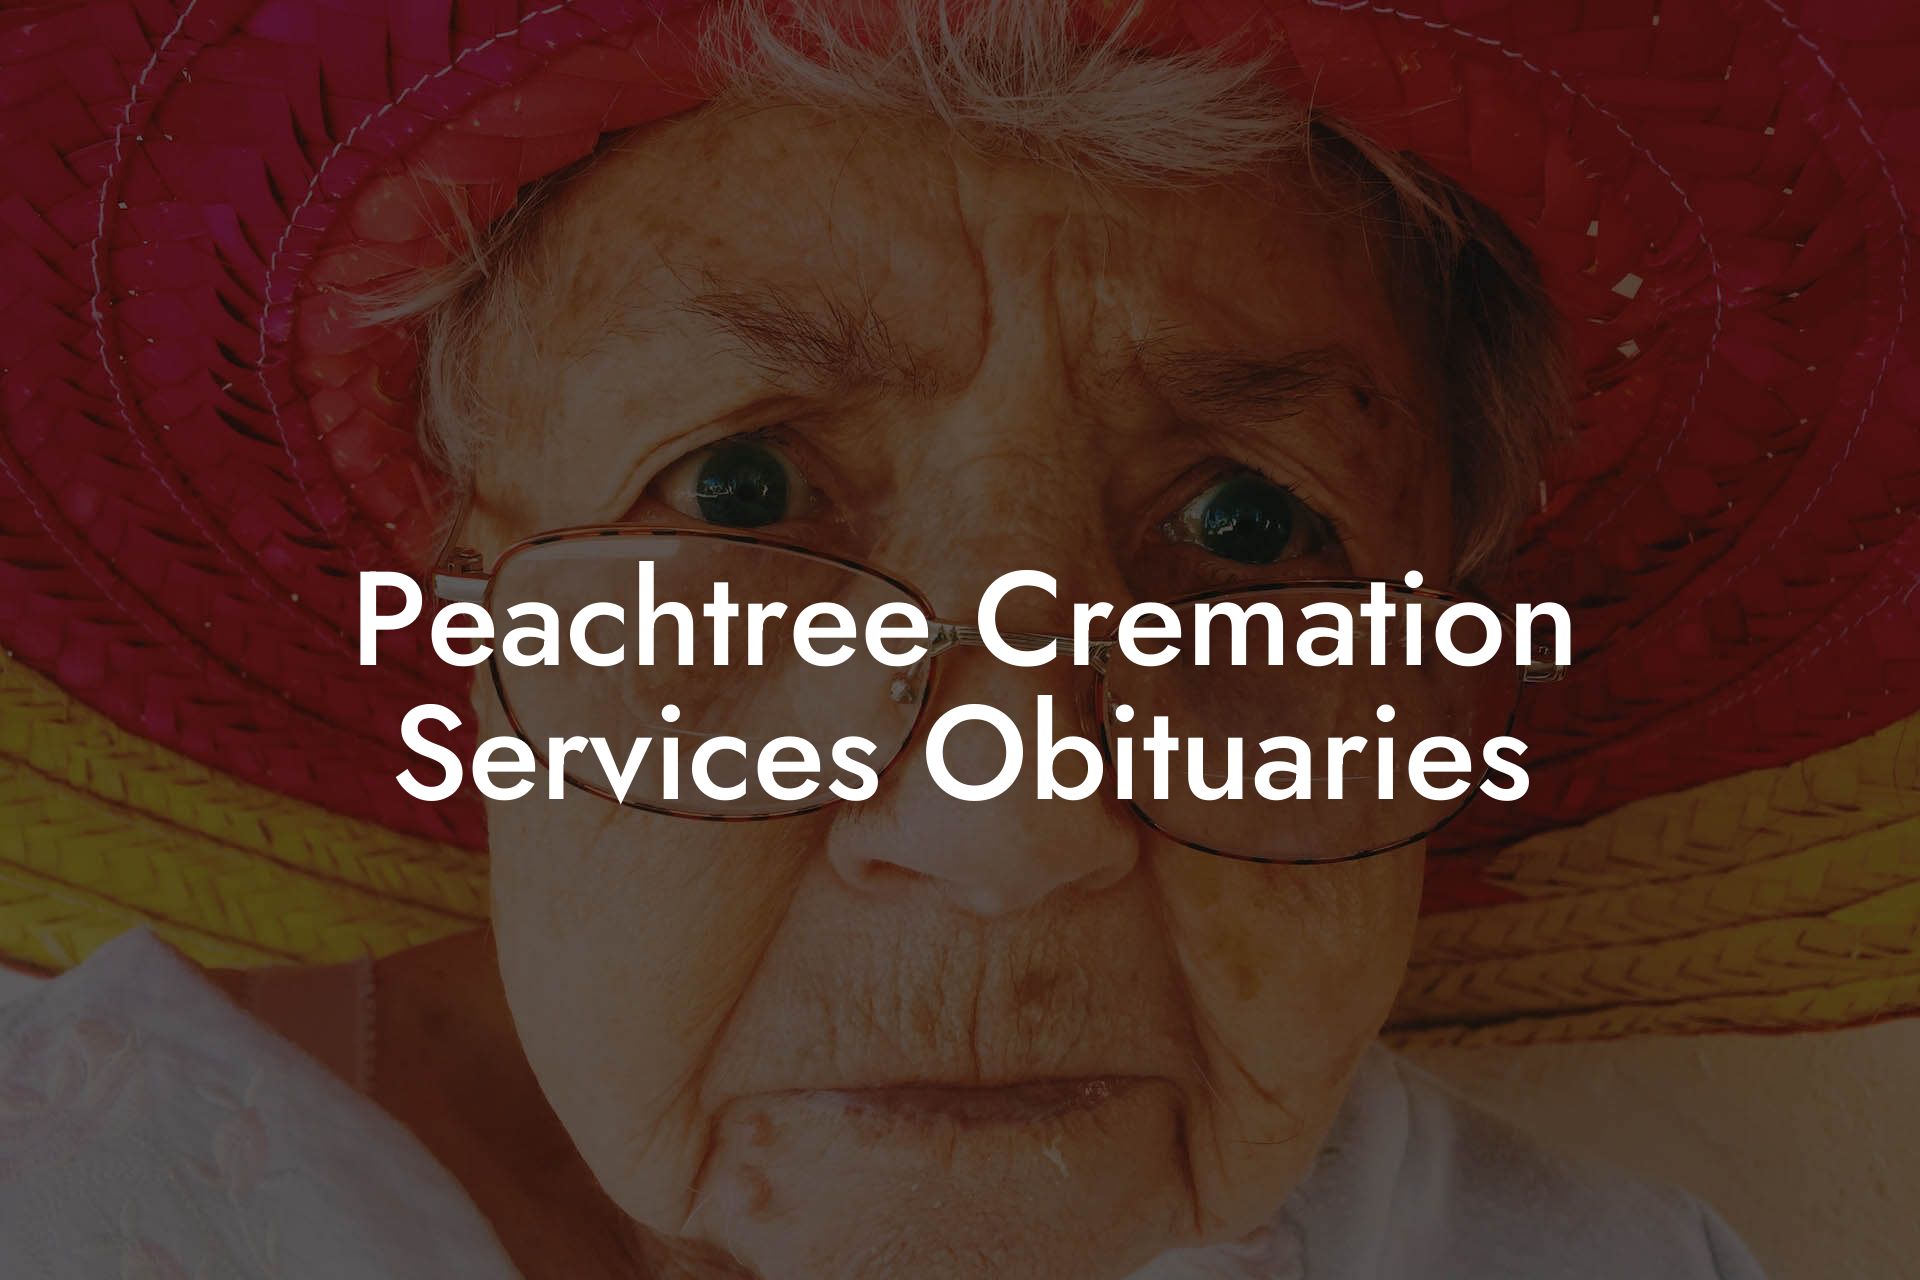 Peachtree Cremation Services Obituaries